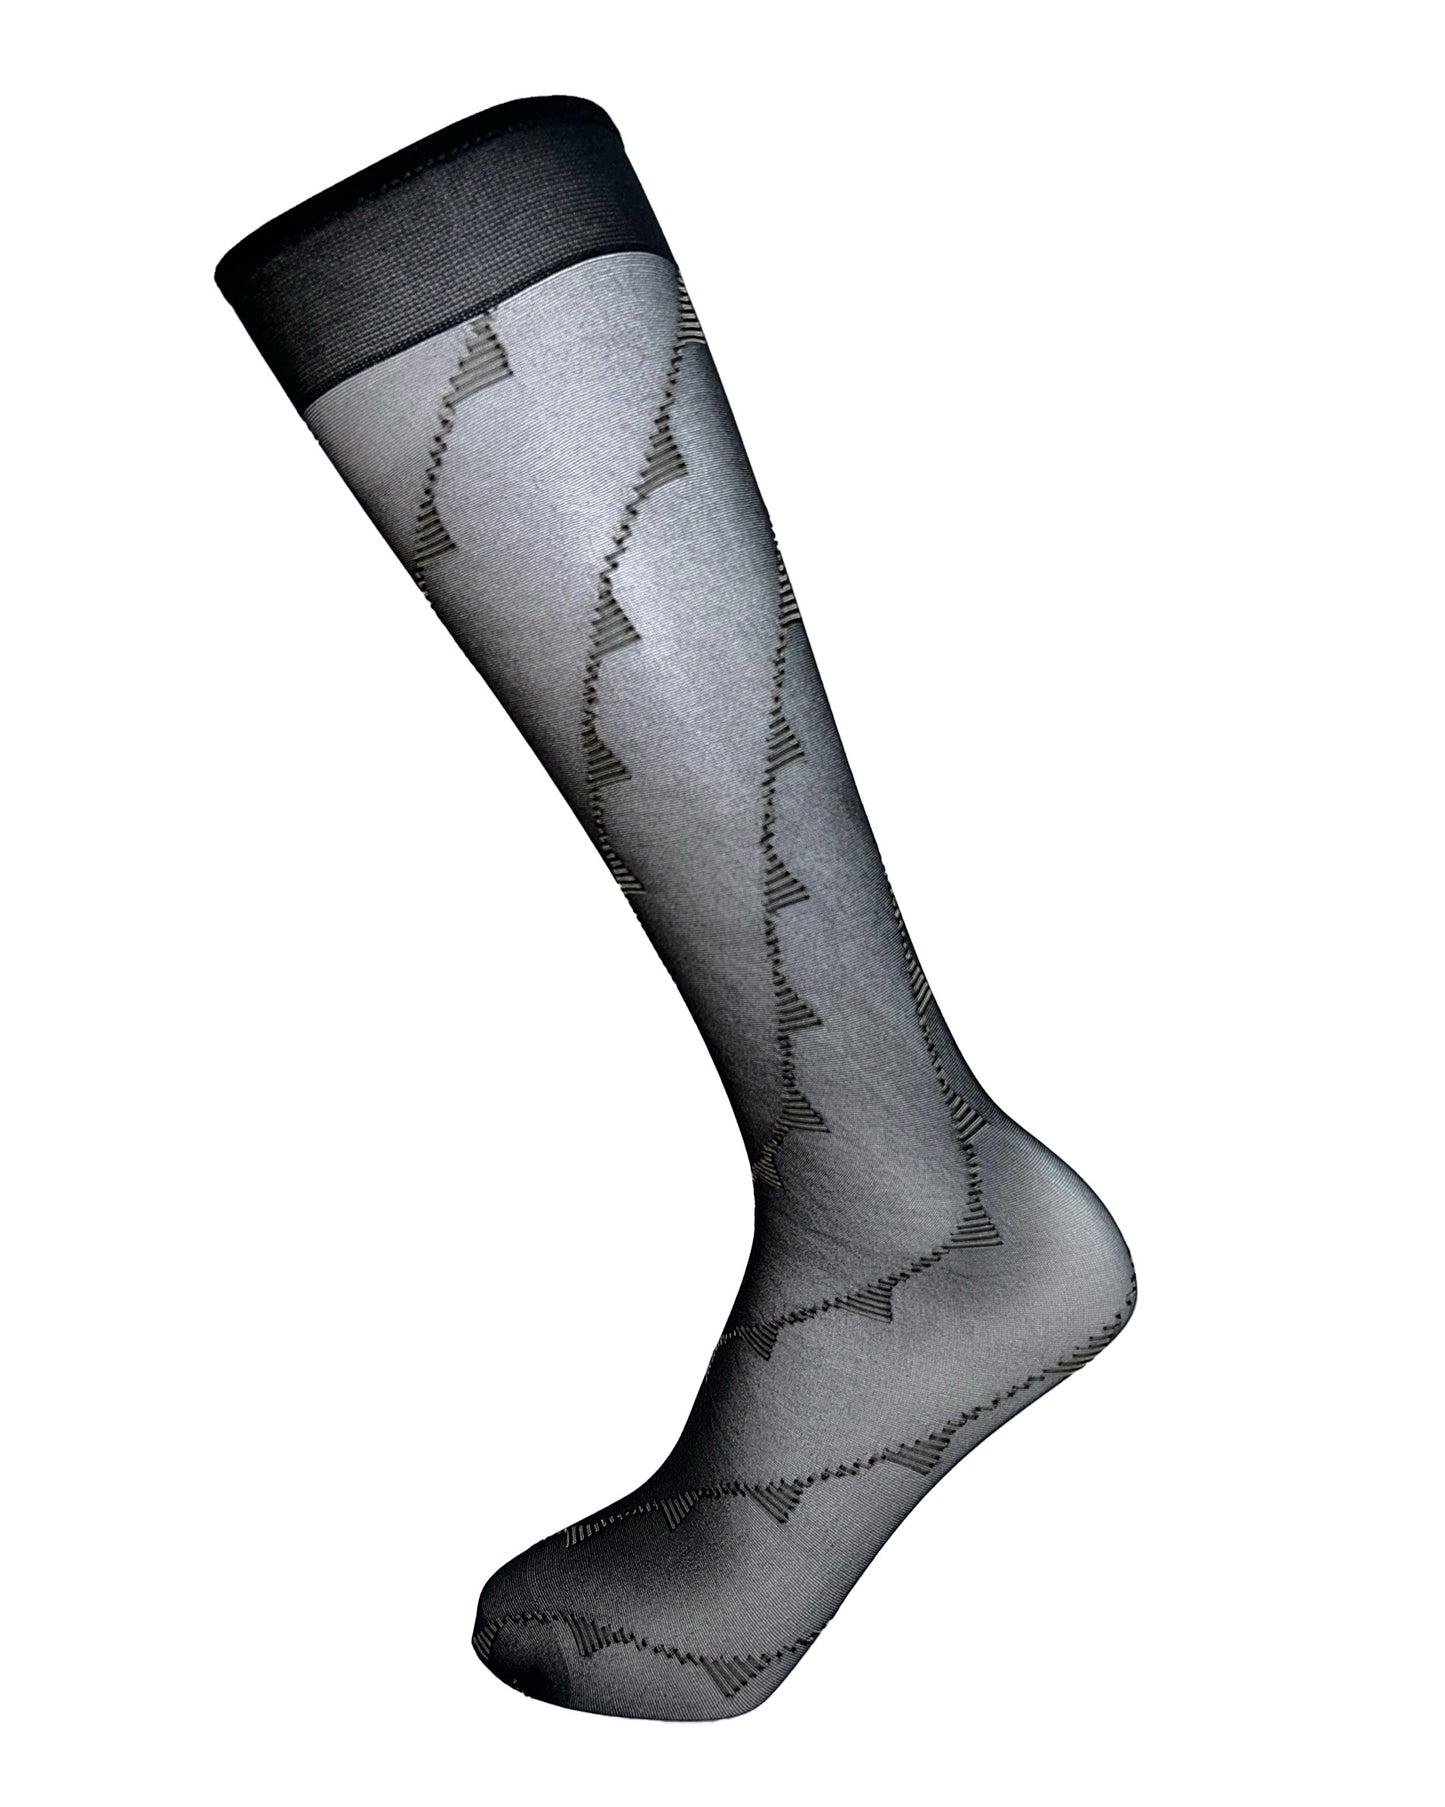 Omsa 3316 Frame Gambaletto - Sheer black fashion knee-high socks with a diagonal linear pattern swirling around the leg.